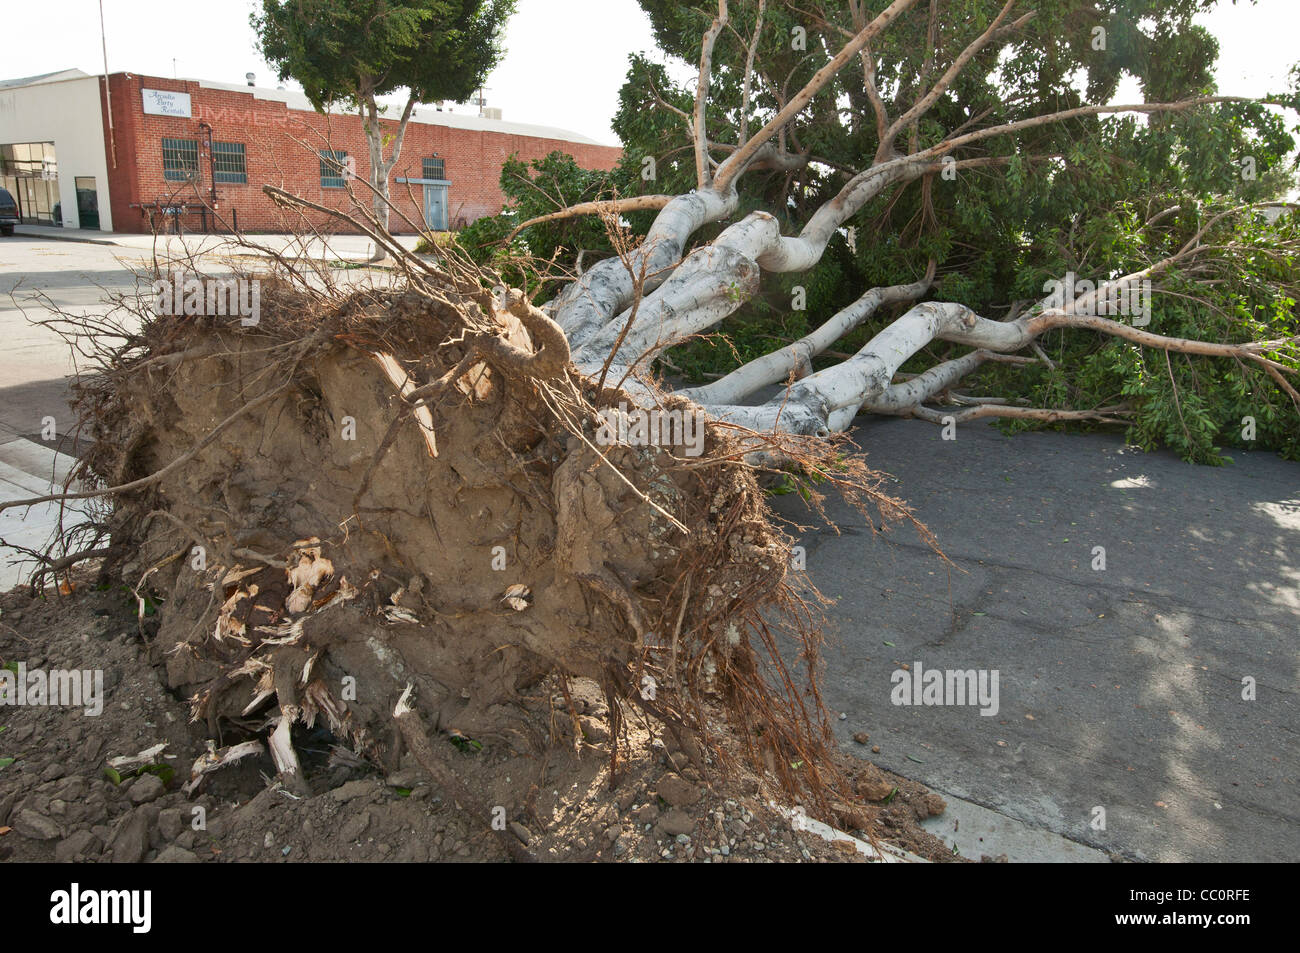 A collapsed tree due to severe winds. Hurricane strength winds knocked down a huge number of trees. Stock Photo